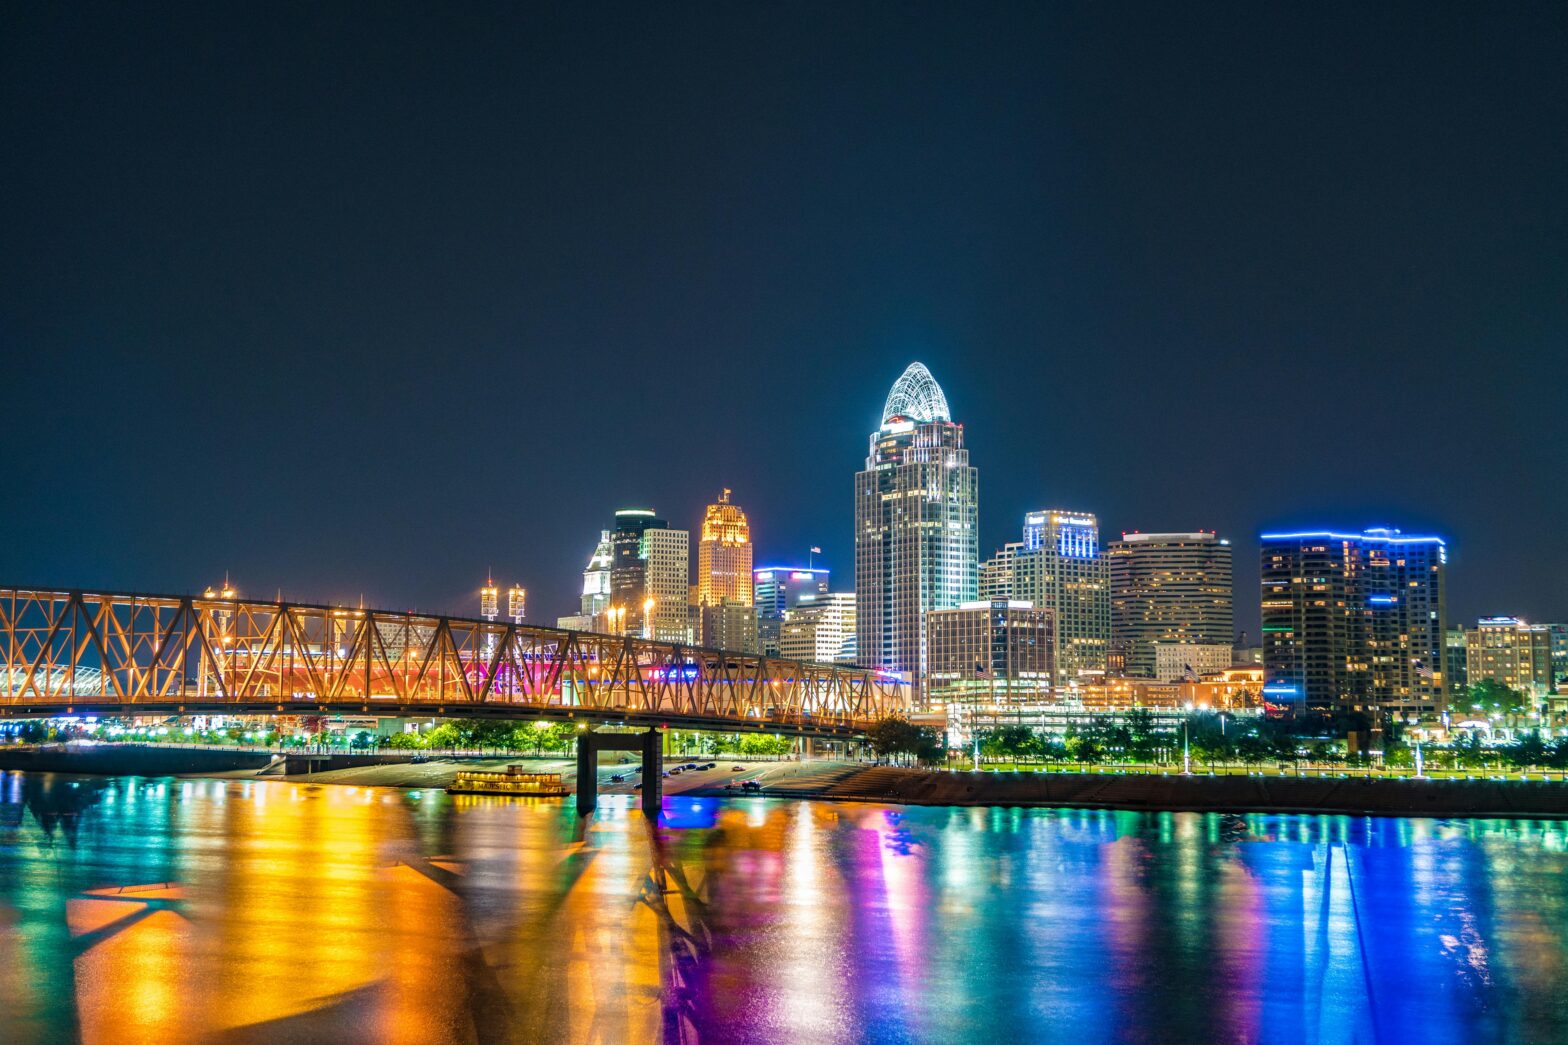 10 Things To Do In Cincinnati For $25 Or Less